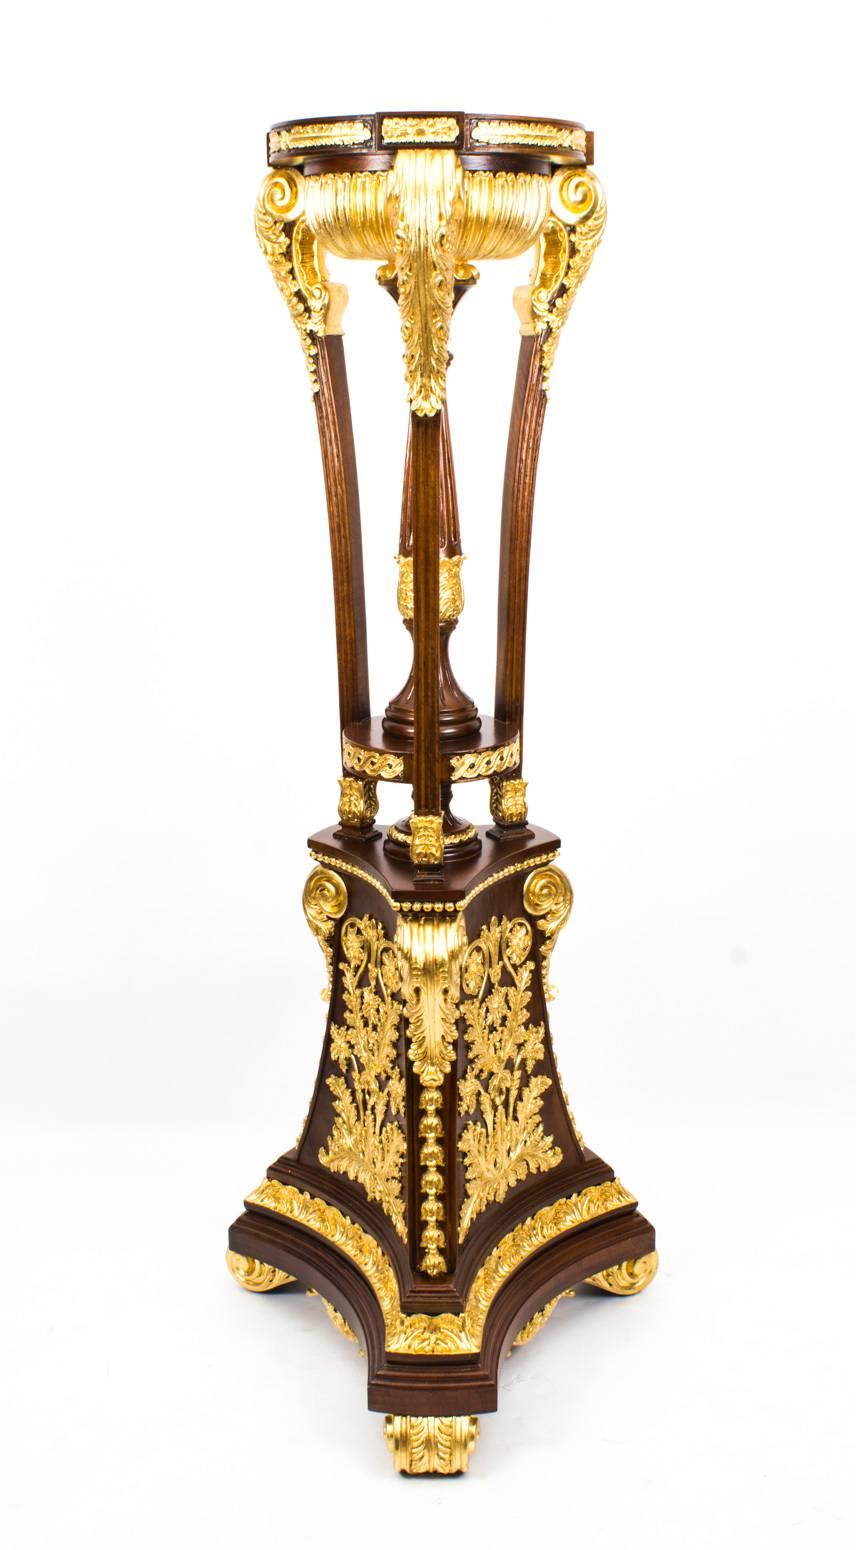 This extraordinary monumental pair of 6ft mahogany and giltwood torchers of impressive size in fabulous Empire style, date from the last quarter of the 20th century. 

The torchers are supported by tall tripod bases on acanthus scroll feet worked